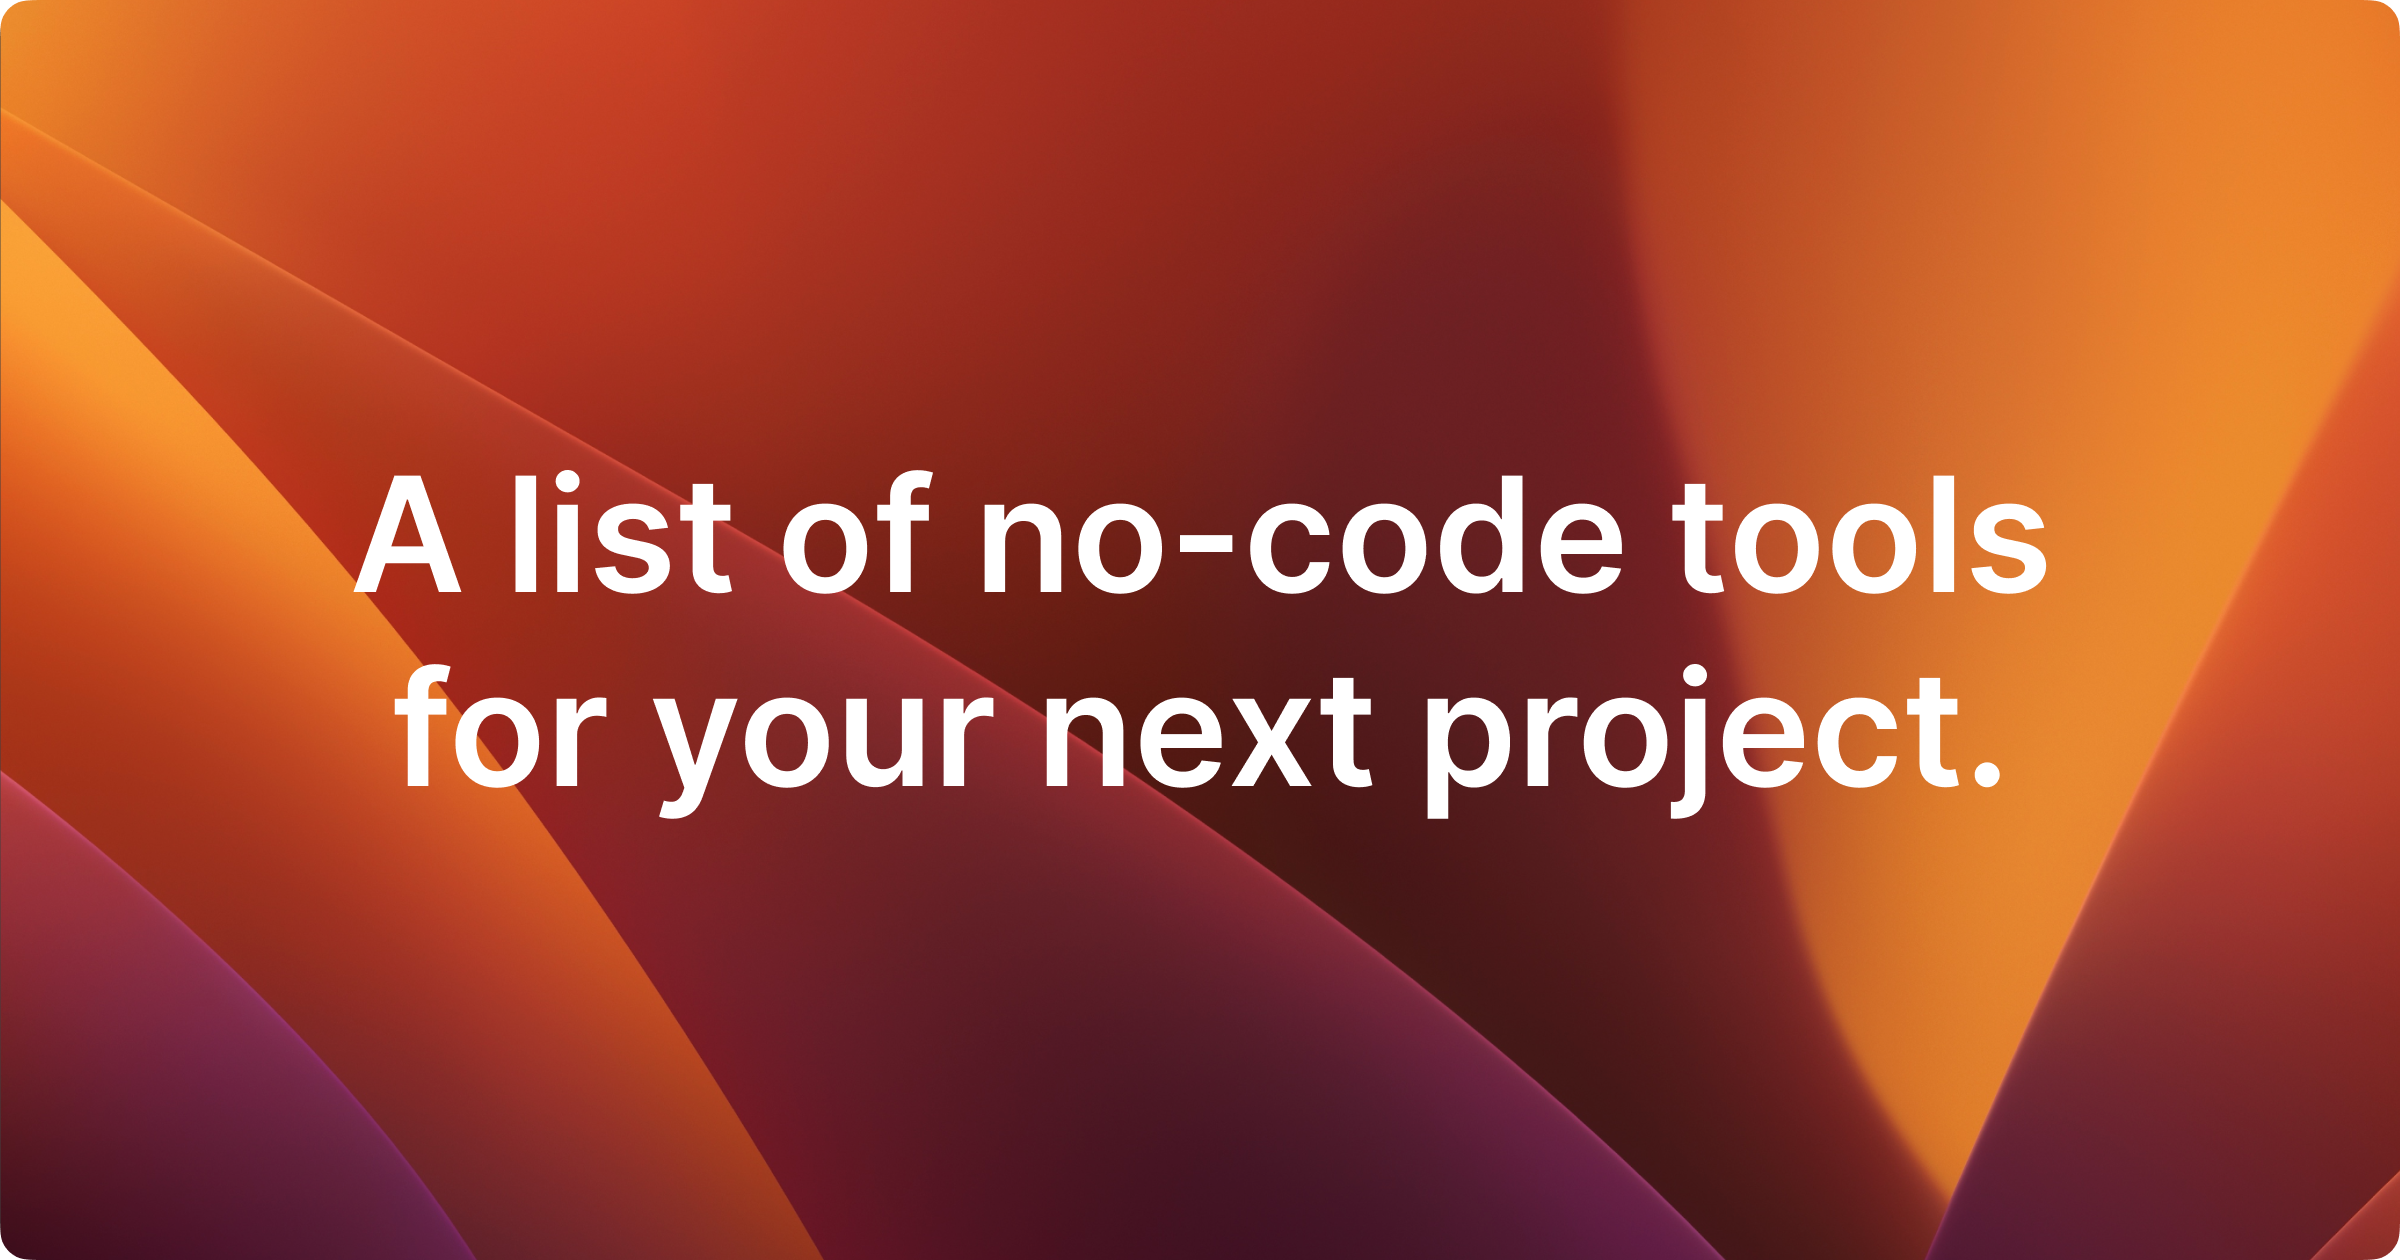 No-Code Tools to Use for Your Next Project